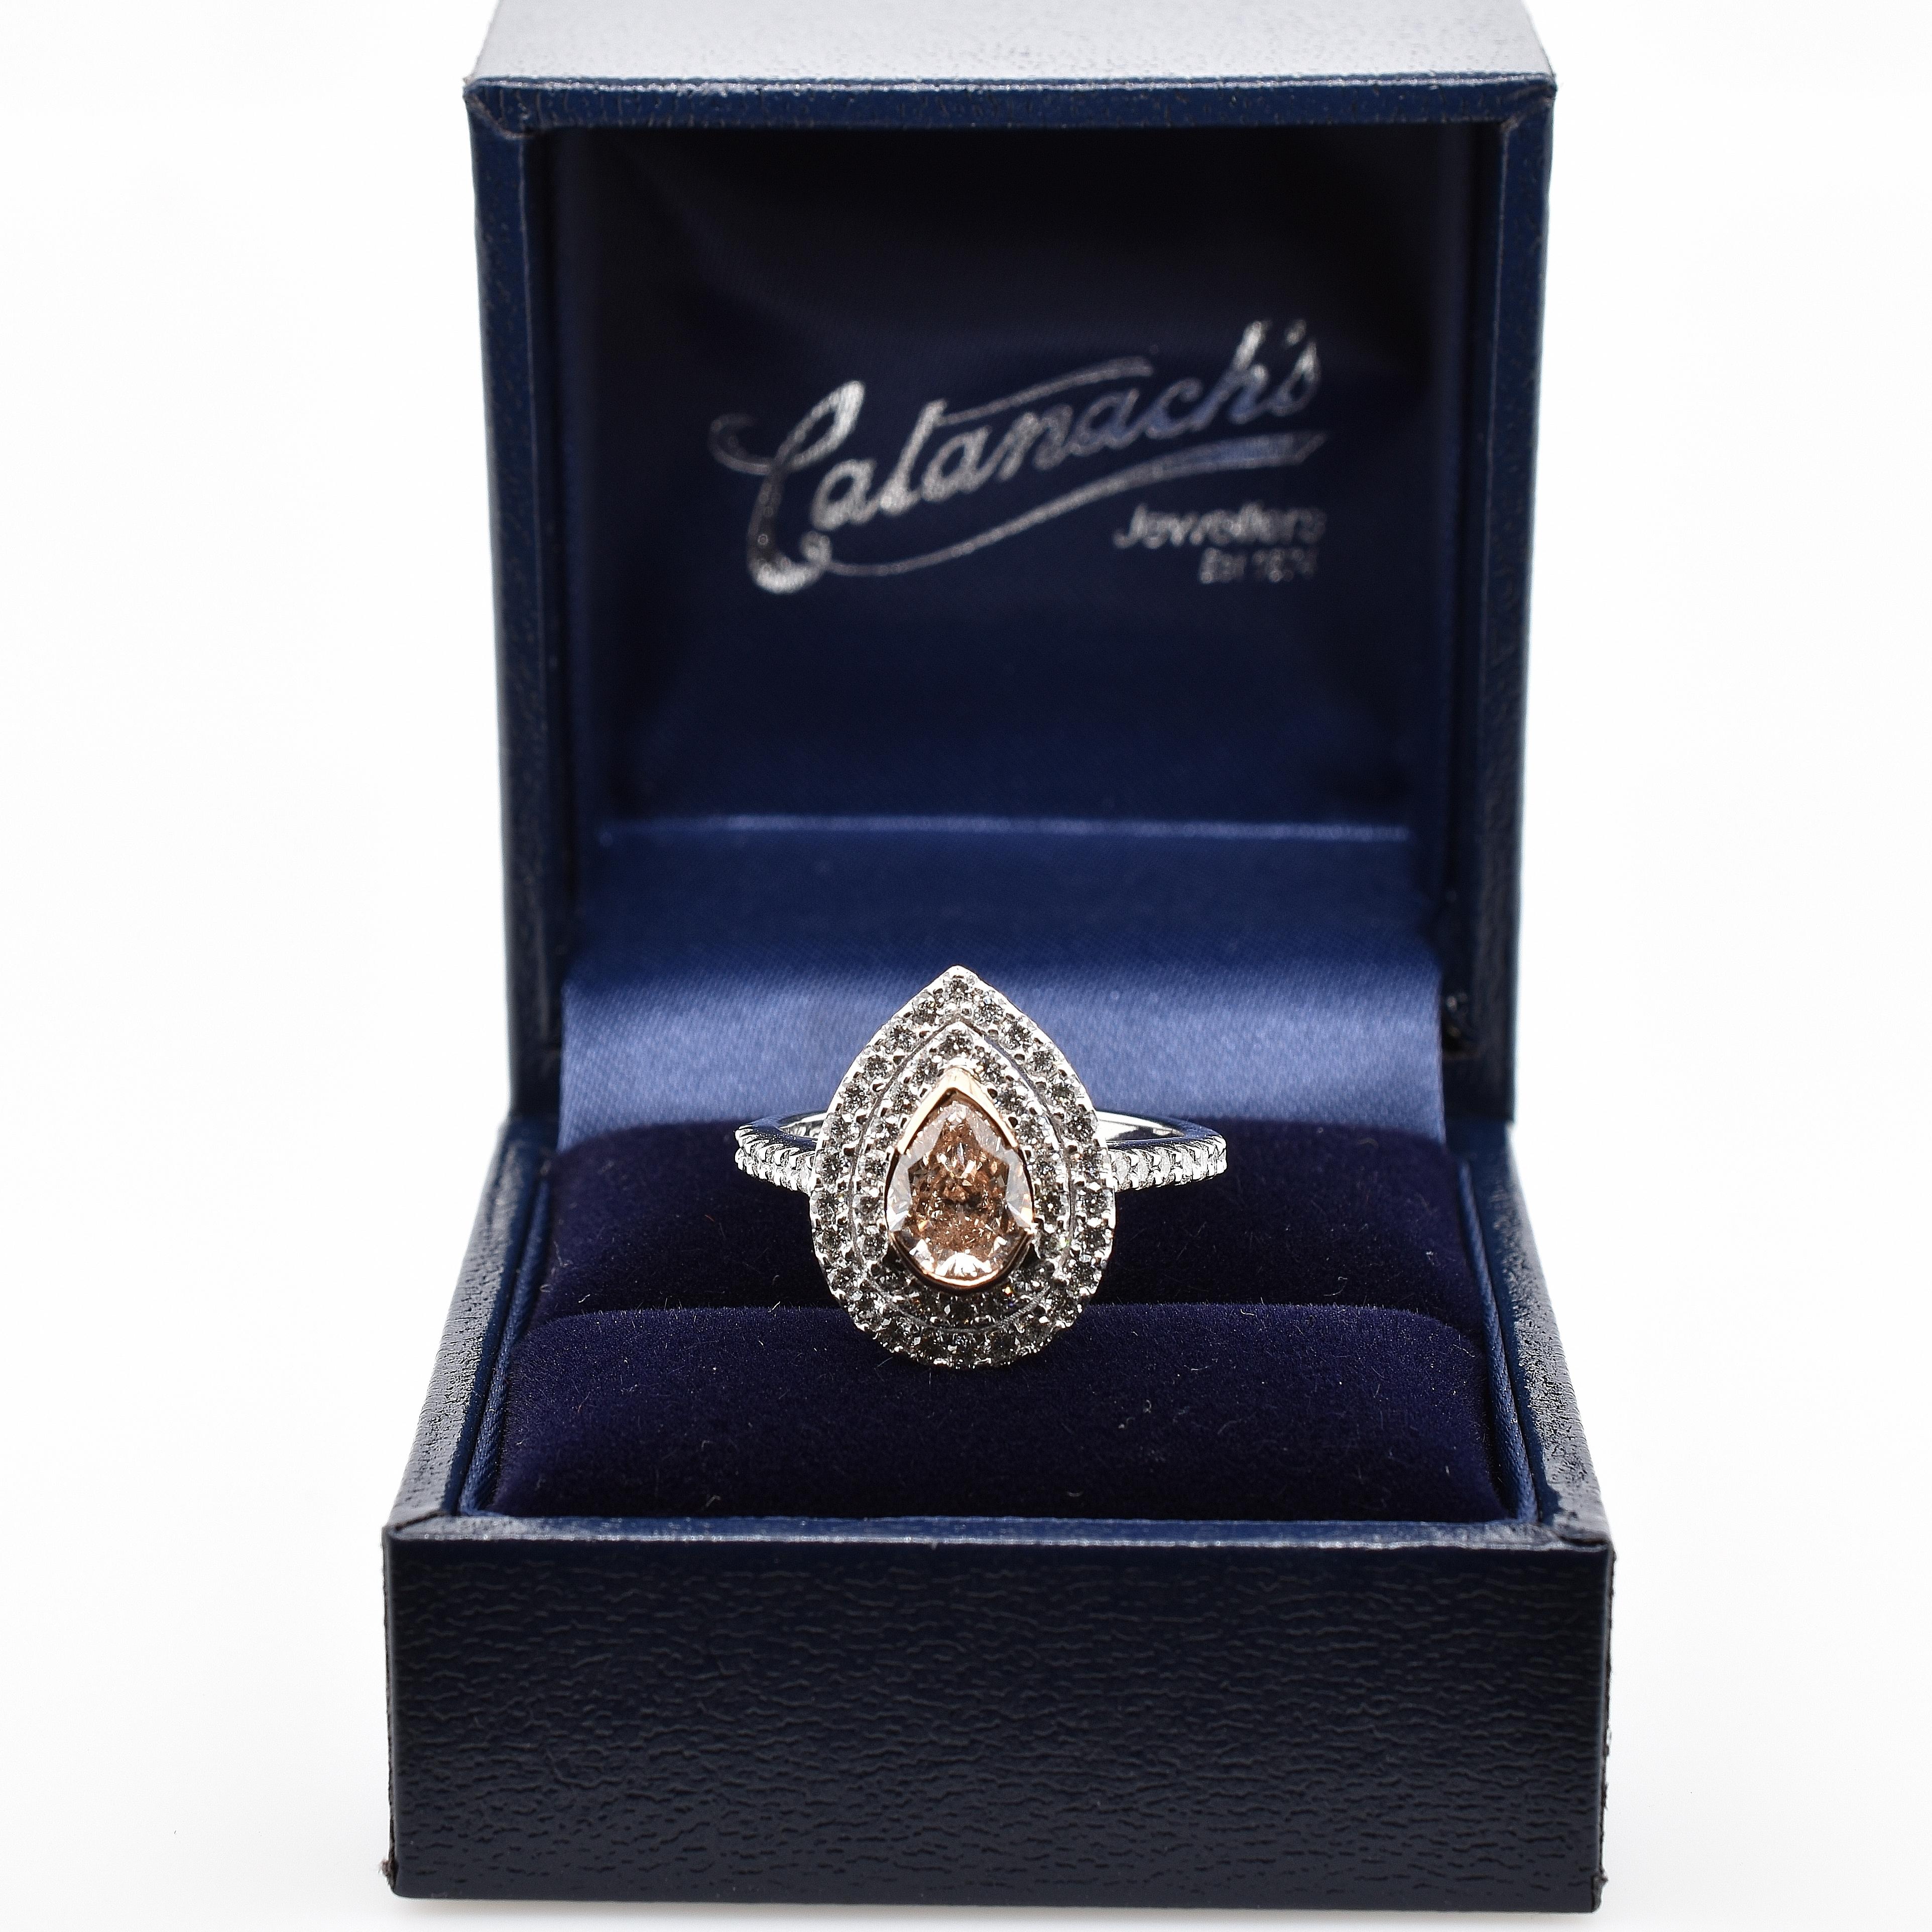 18ct white gold pear shaped peach diamond and two row brilliant diamond halo cluster ring. The natural peach diamond is 0.83ct centre bezel set in 18ct rose gold and white diamonds are claw set as halo and shoulders. 58 round brilliant cut diamonds